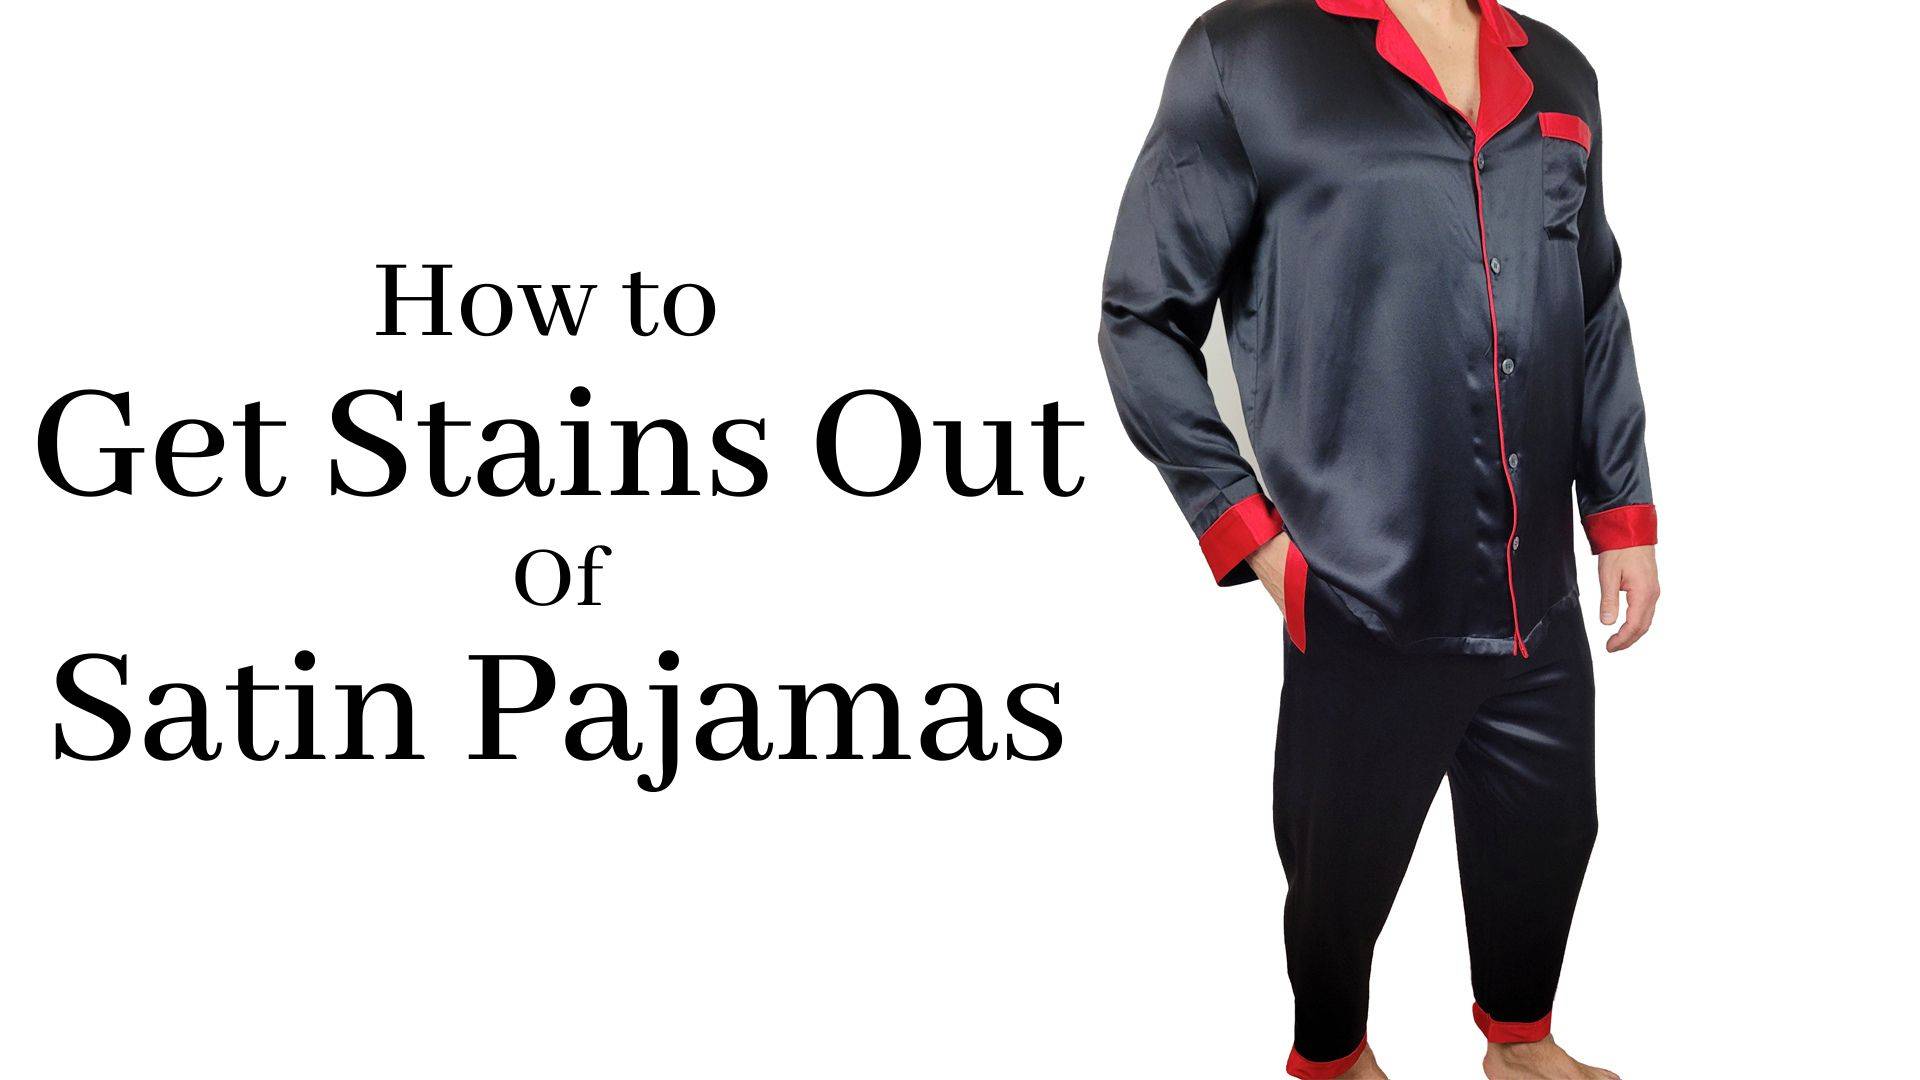 how to get stains out of satin pajamas header image